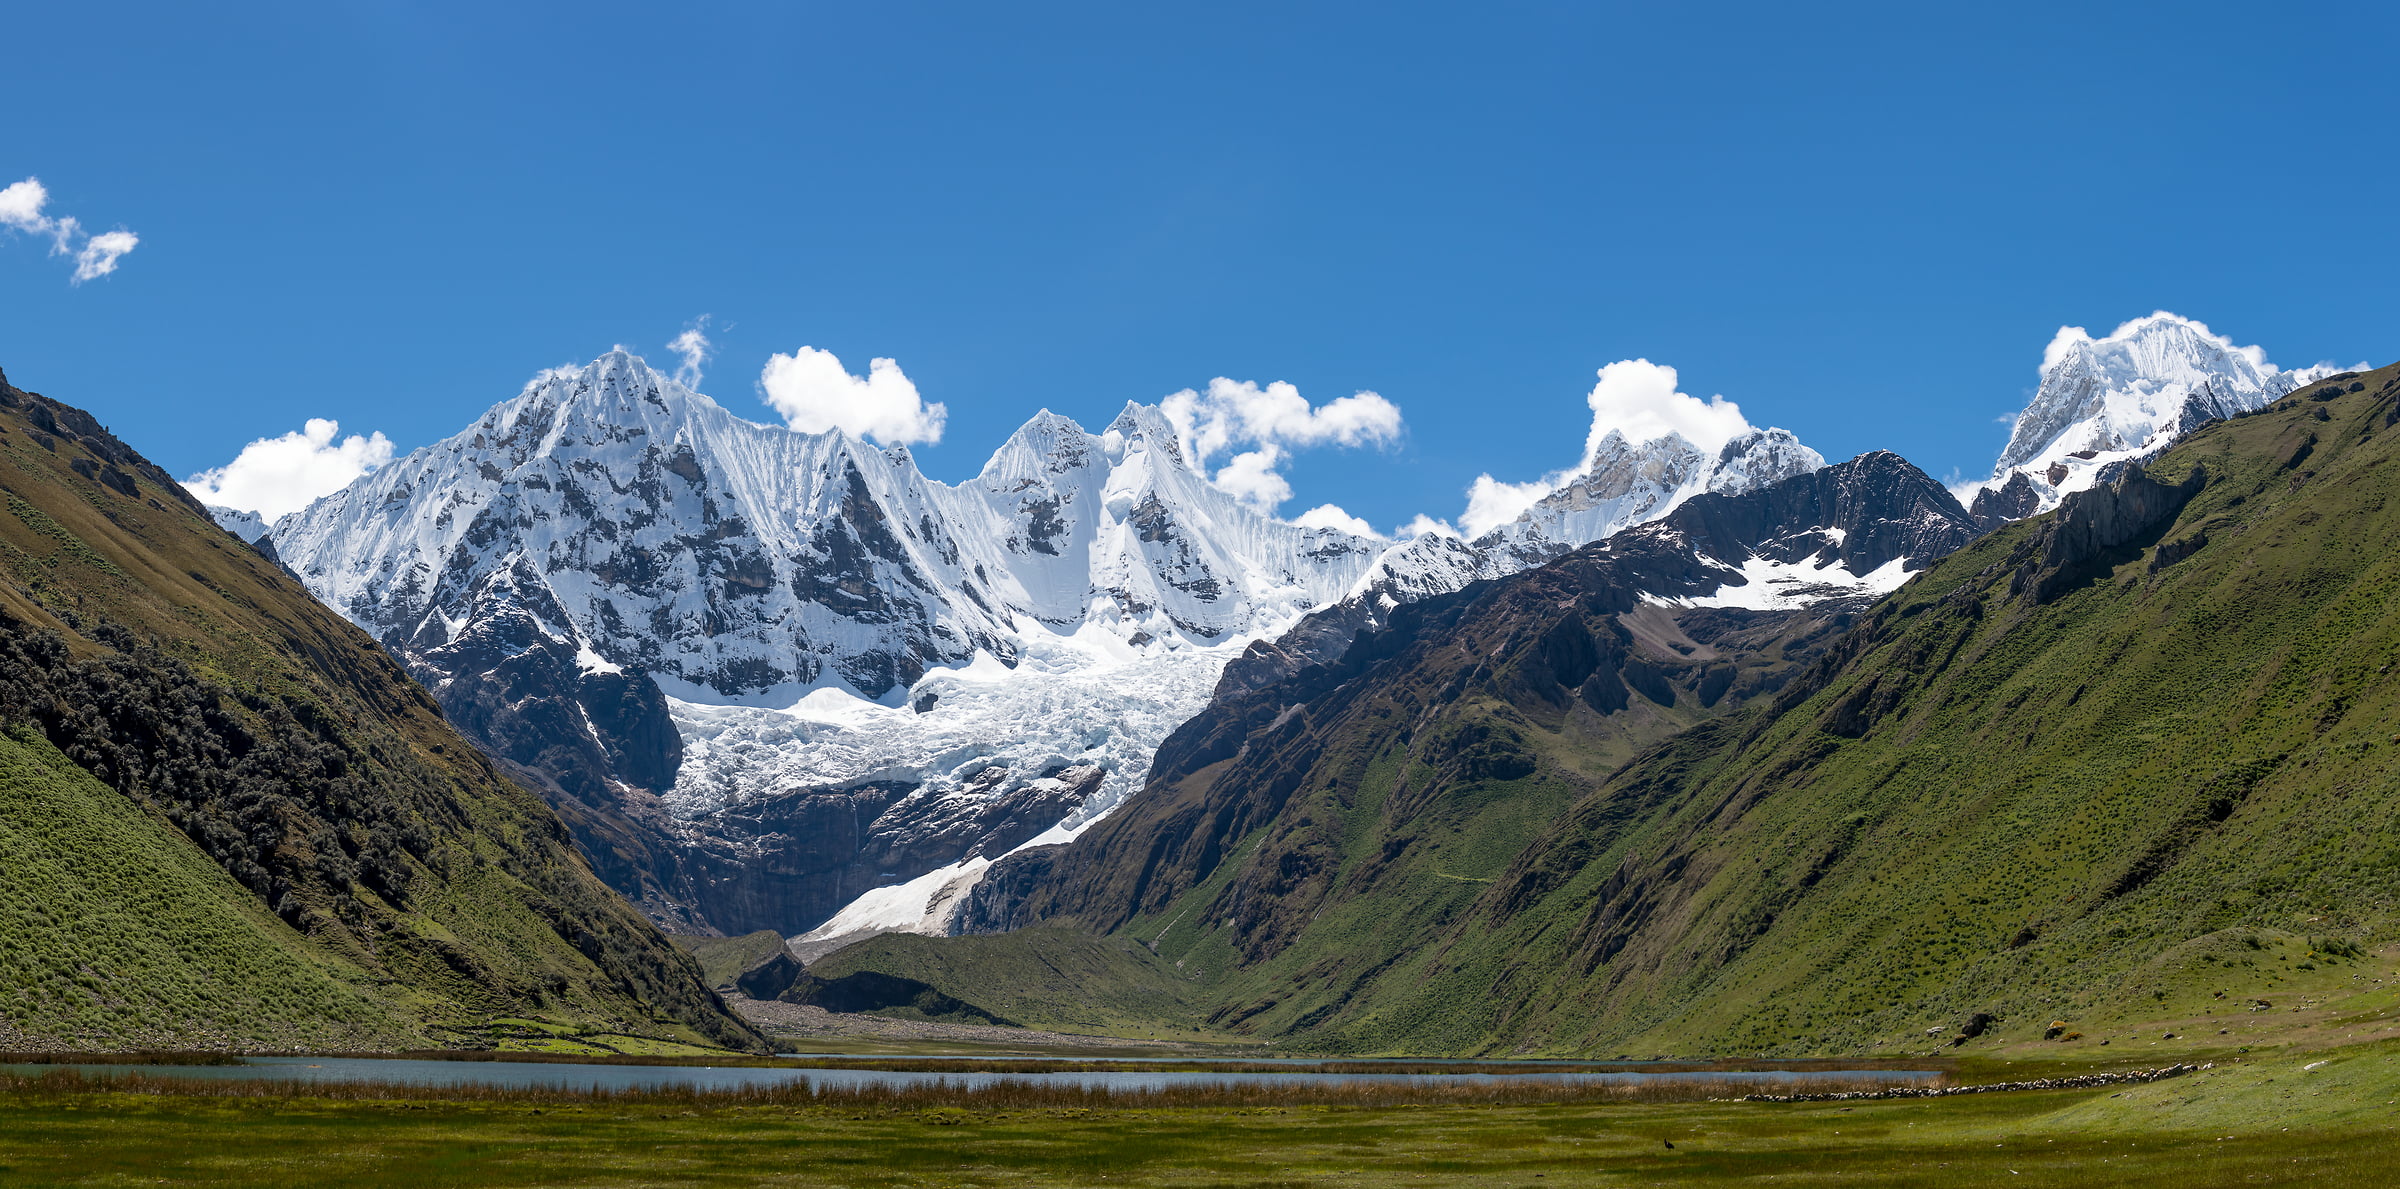 90 megapixels! A very high resolution, large-format VAST photo print of mountains and Cordillera Huayhuash Valley in Peru; fine art landscape photo created by Scott Rinckenberger.